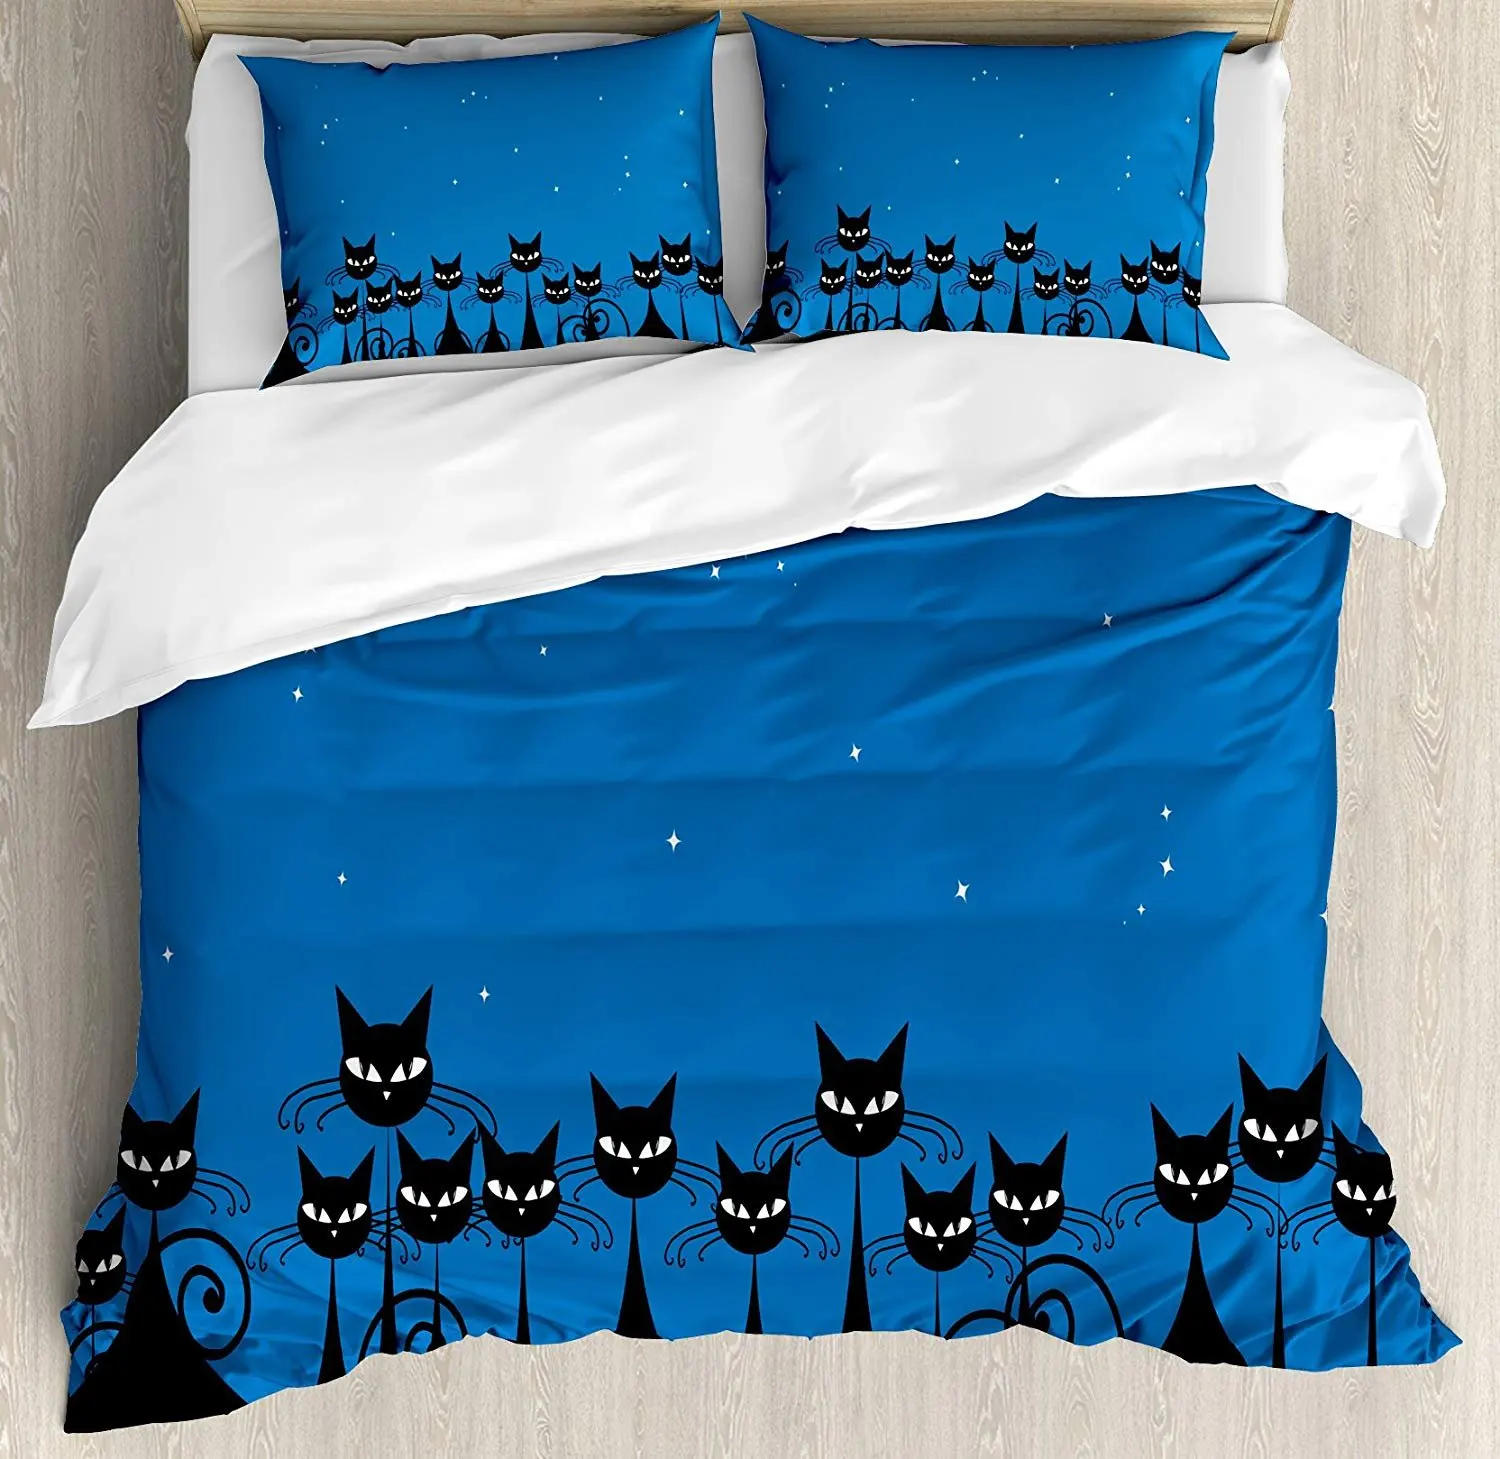 

Night Bedding Set Artistic Graphic Crowd of Stylized Black Cats and Starry Sky on the Duvet Cover Pillowcase Bedclothes Bed Set